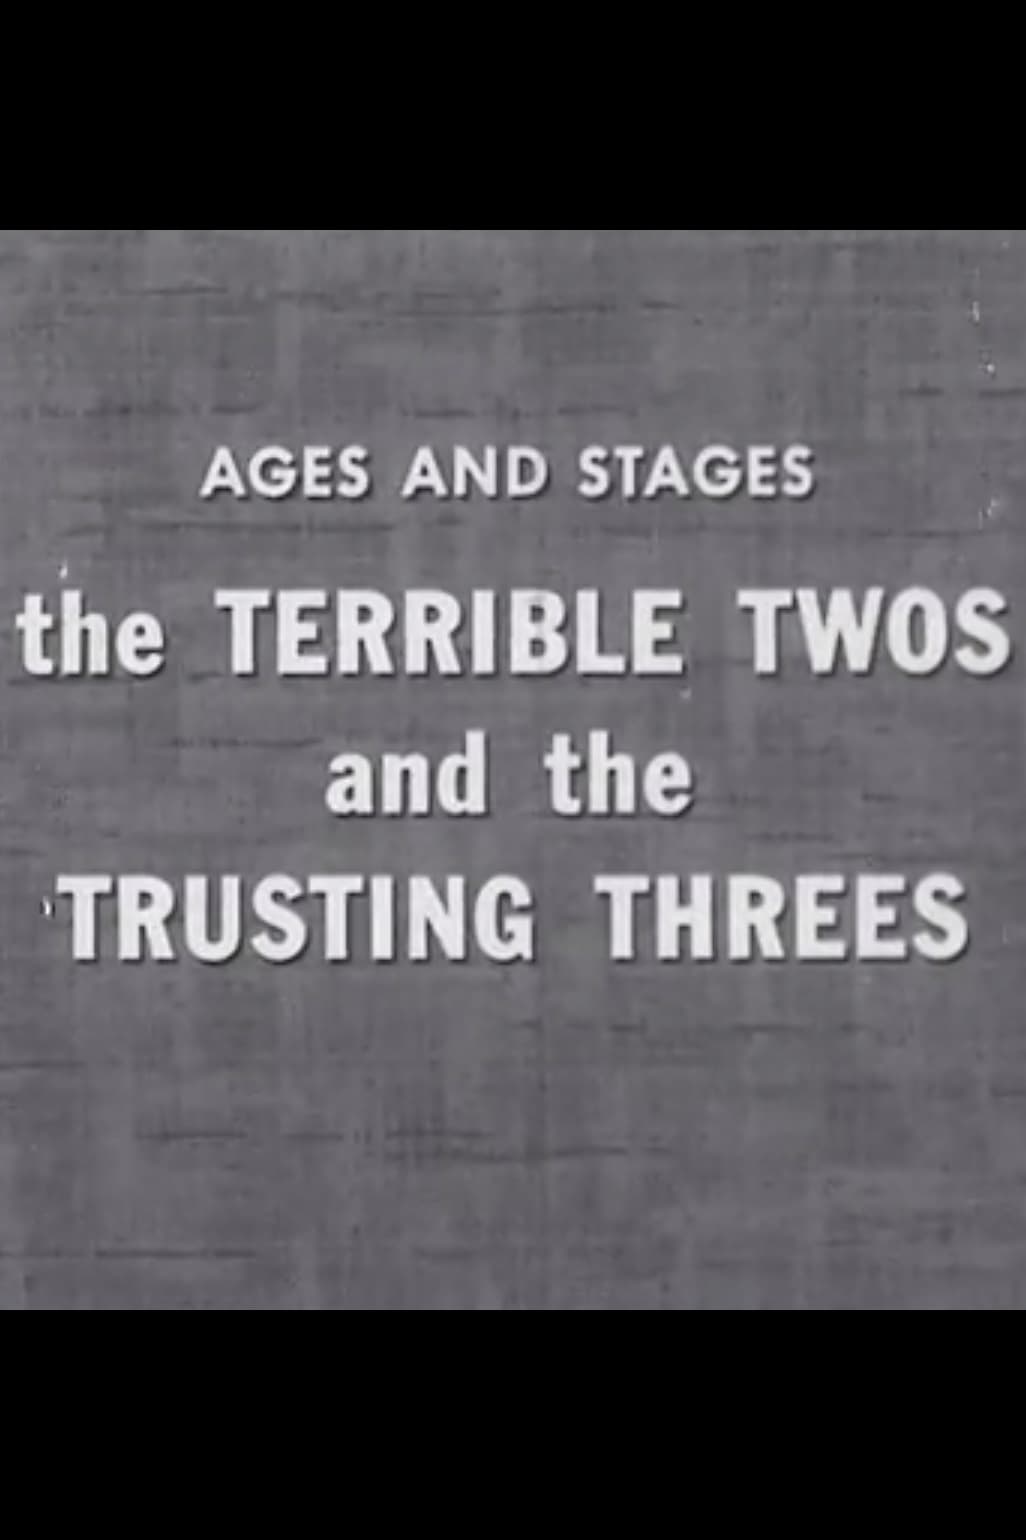 The Terrible Twos and the Trusting Threes